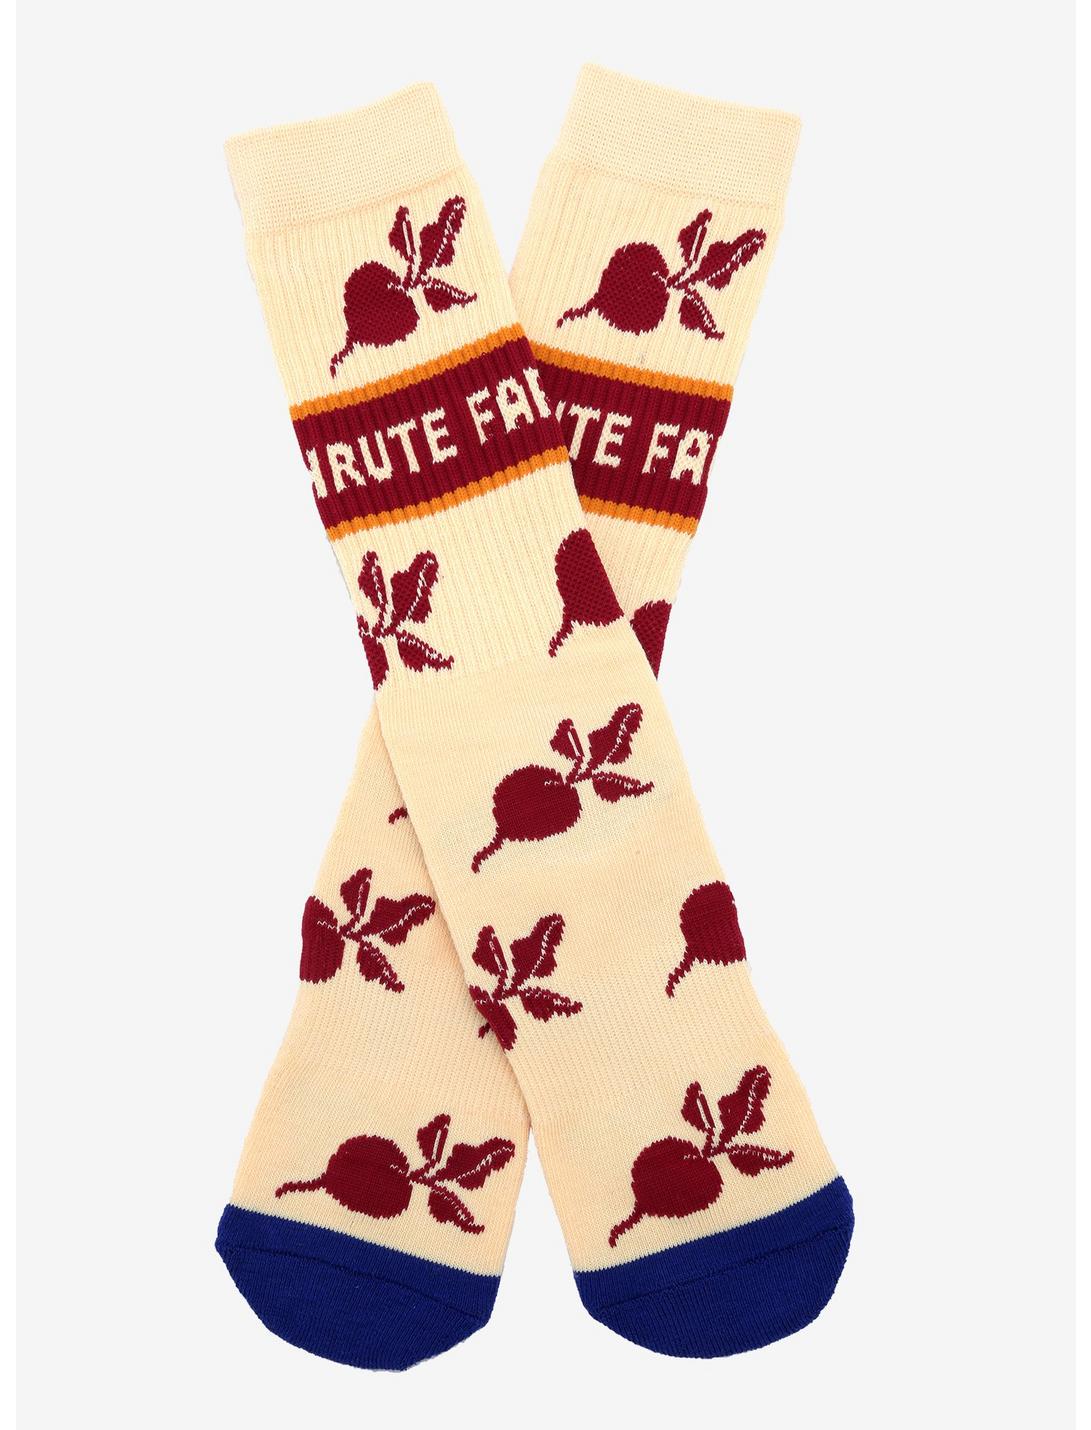 The Office Schrute Farms Beet Allover Print Crew Socks - BoxLunch Exclusive, , hi-res